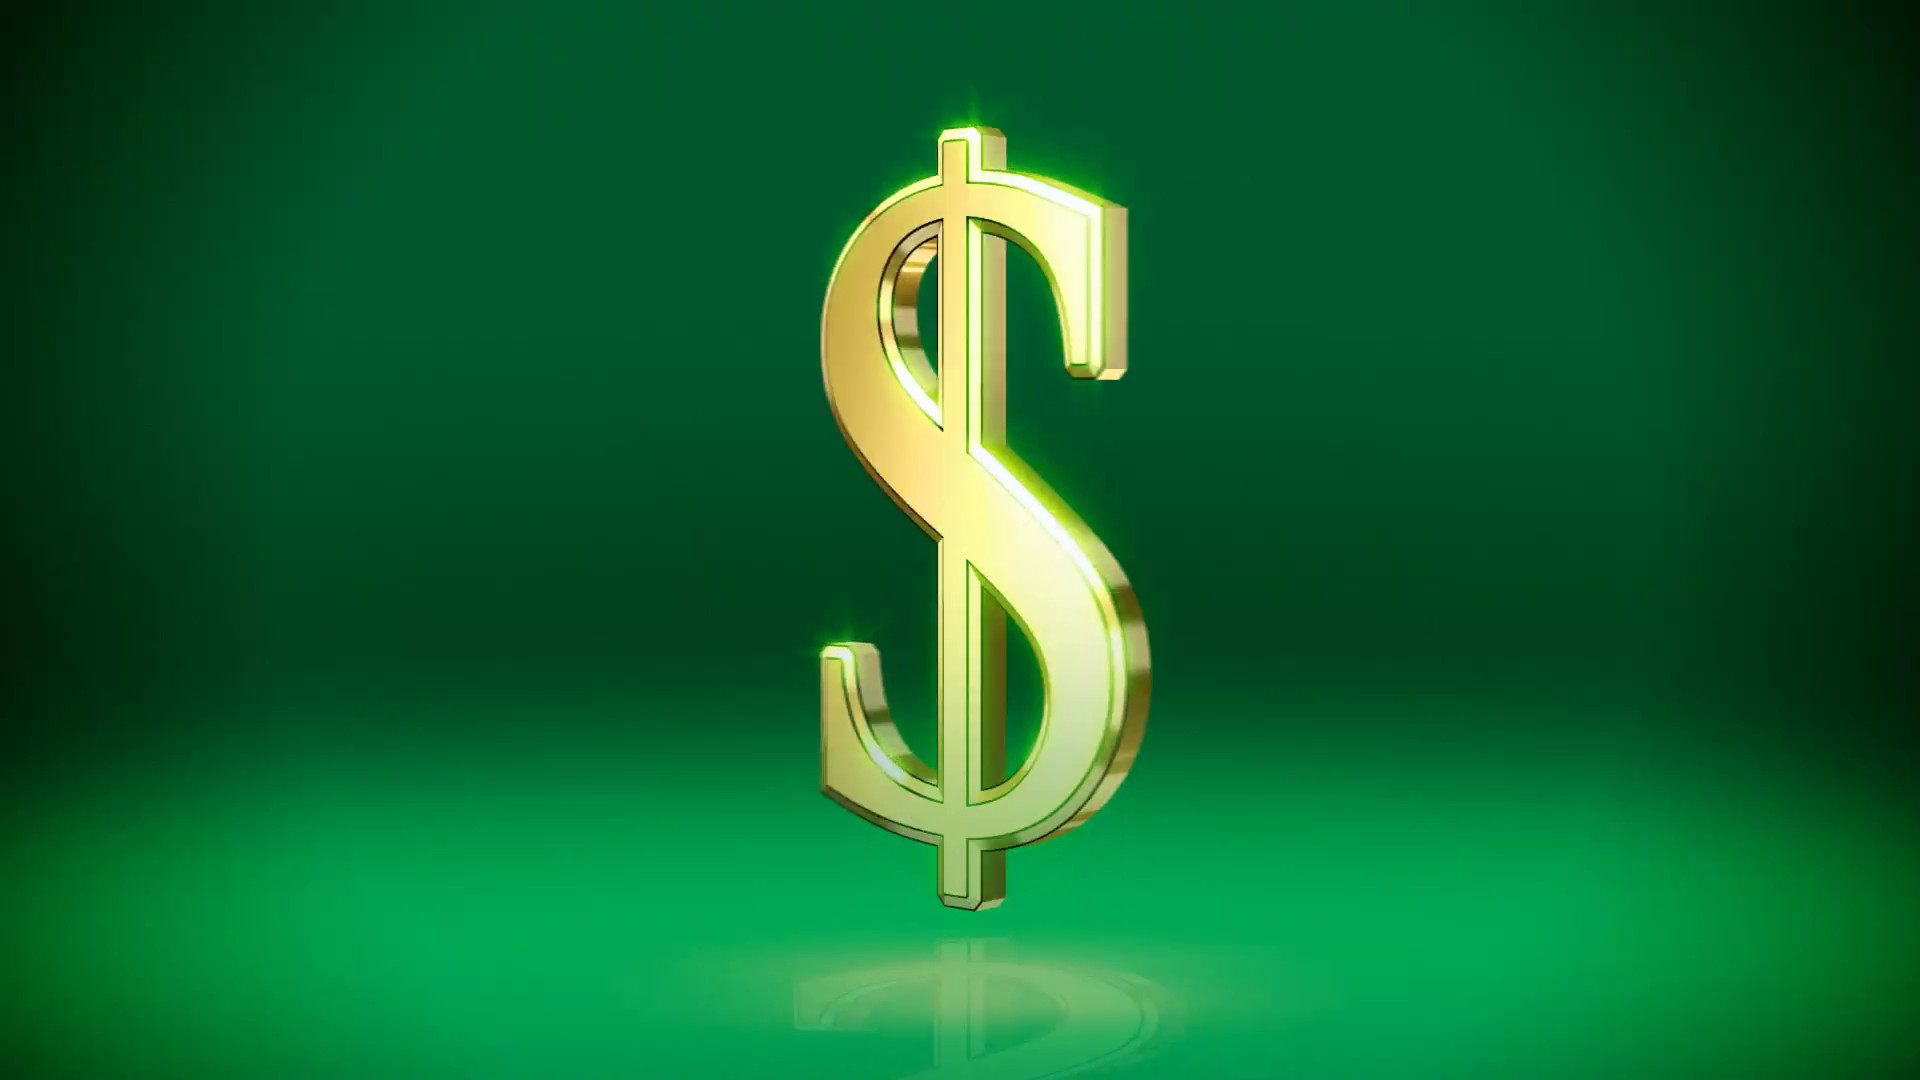 1920x1080 Rotating three-dimensional gold dollar sign on a dark green background,  stops and explodes Motion Background - VideoBlocks